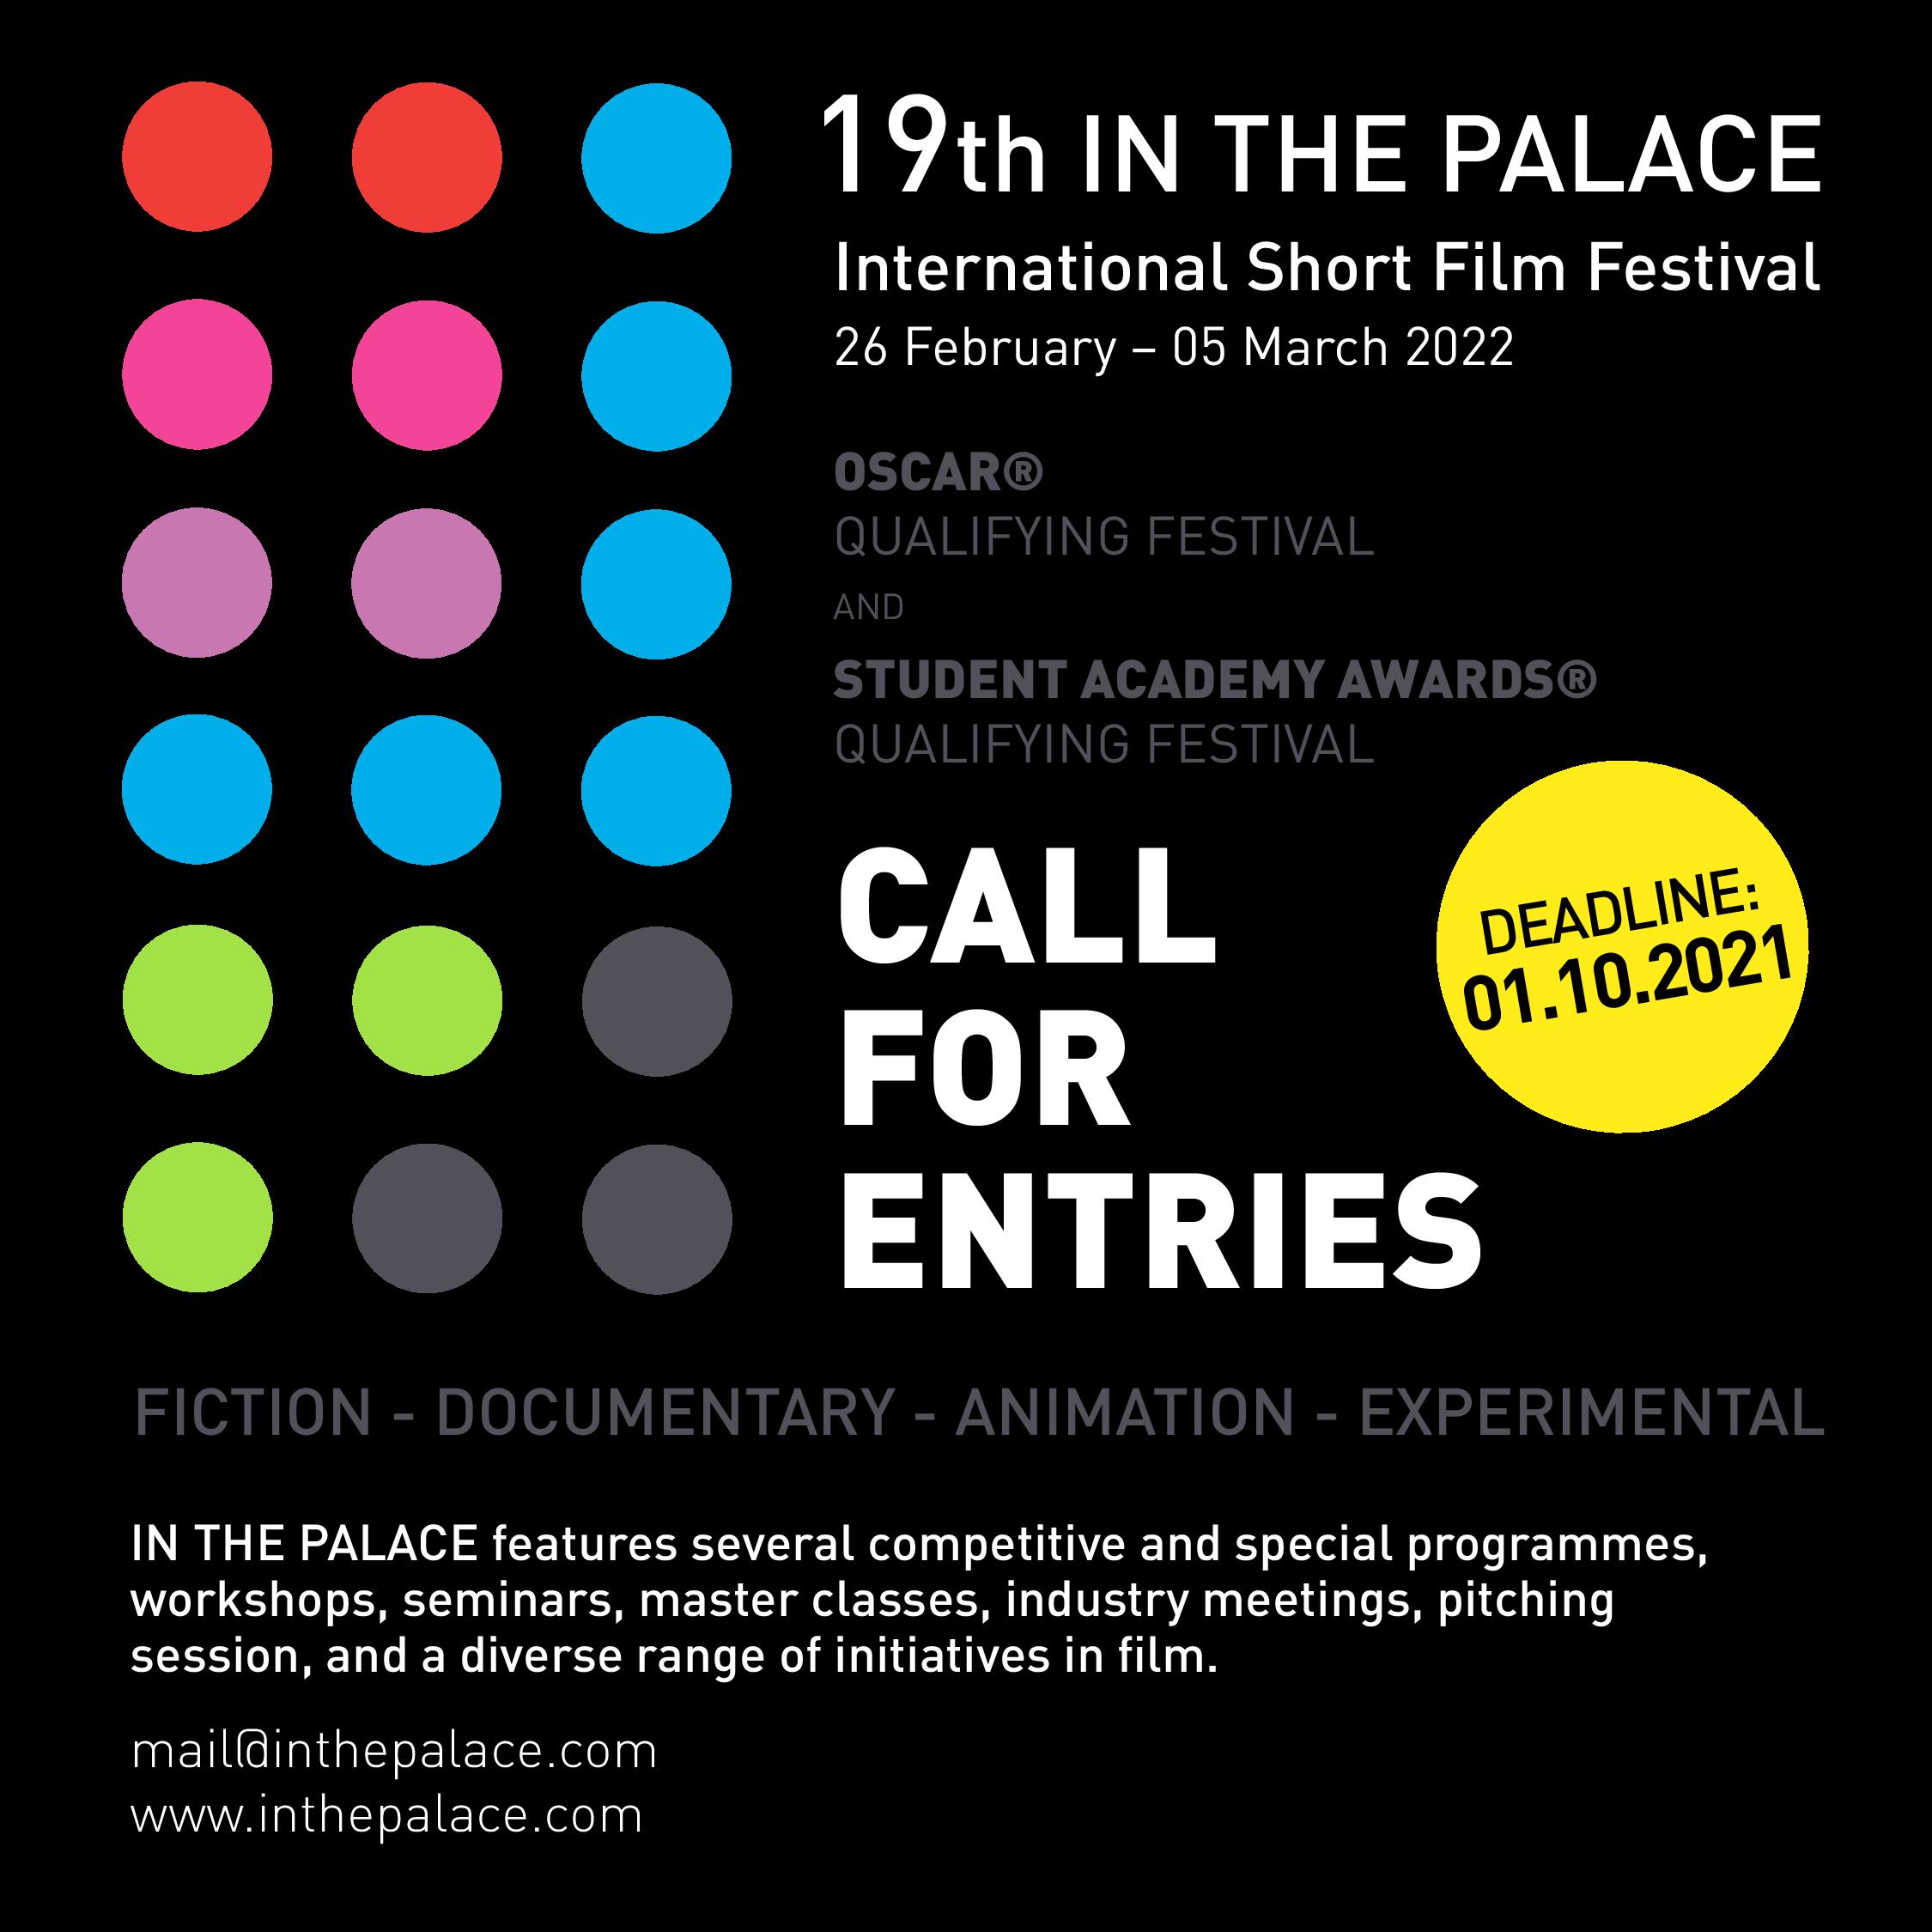 19th IN THE PALACE call for entries